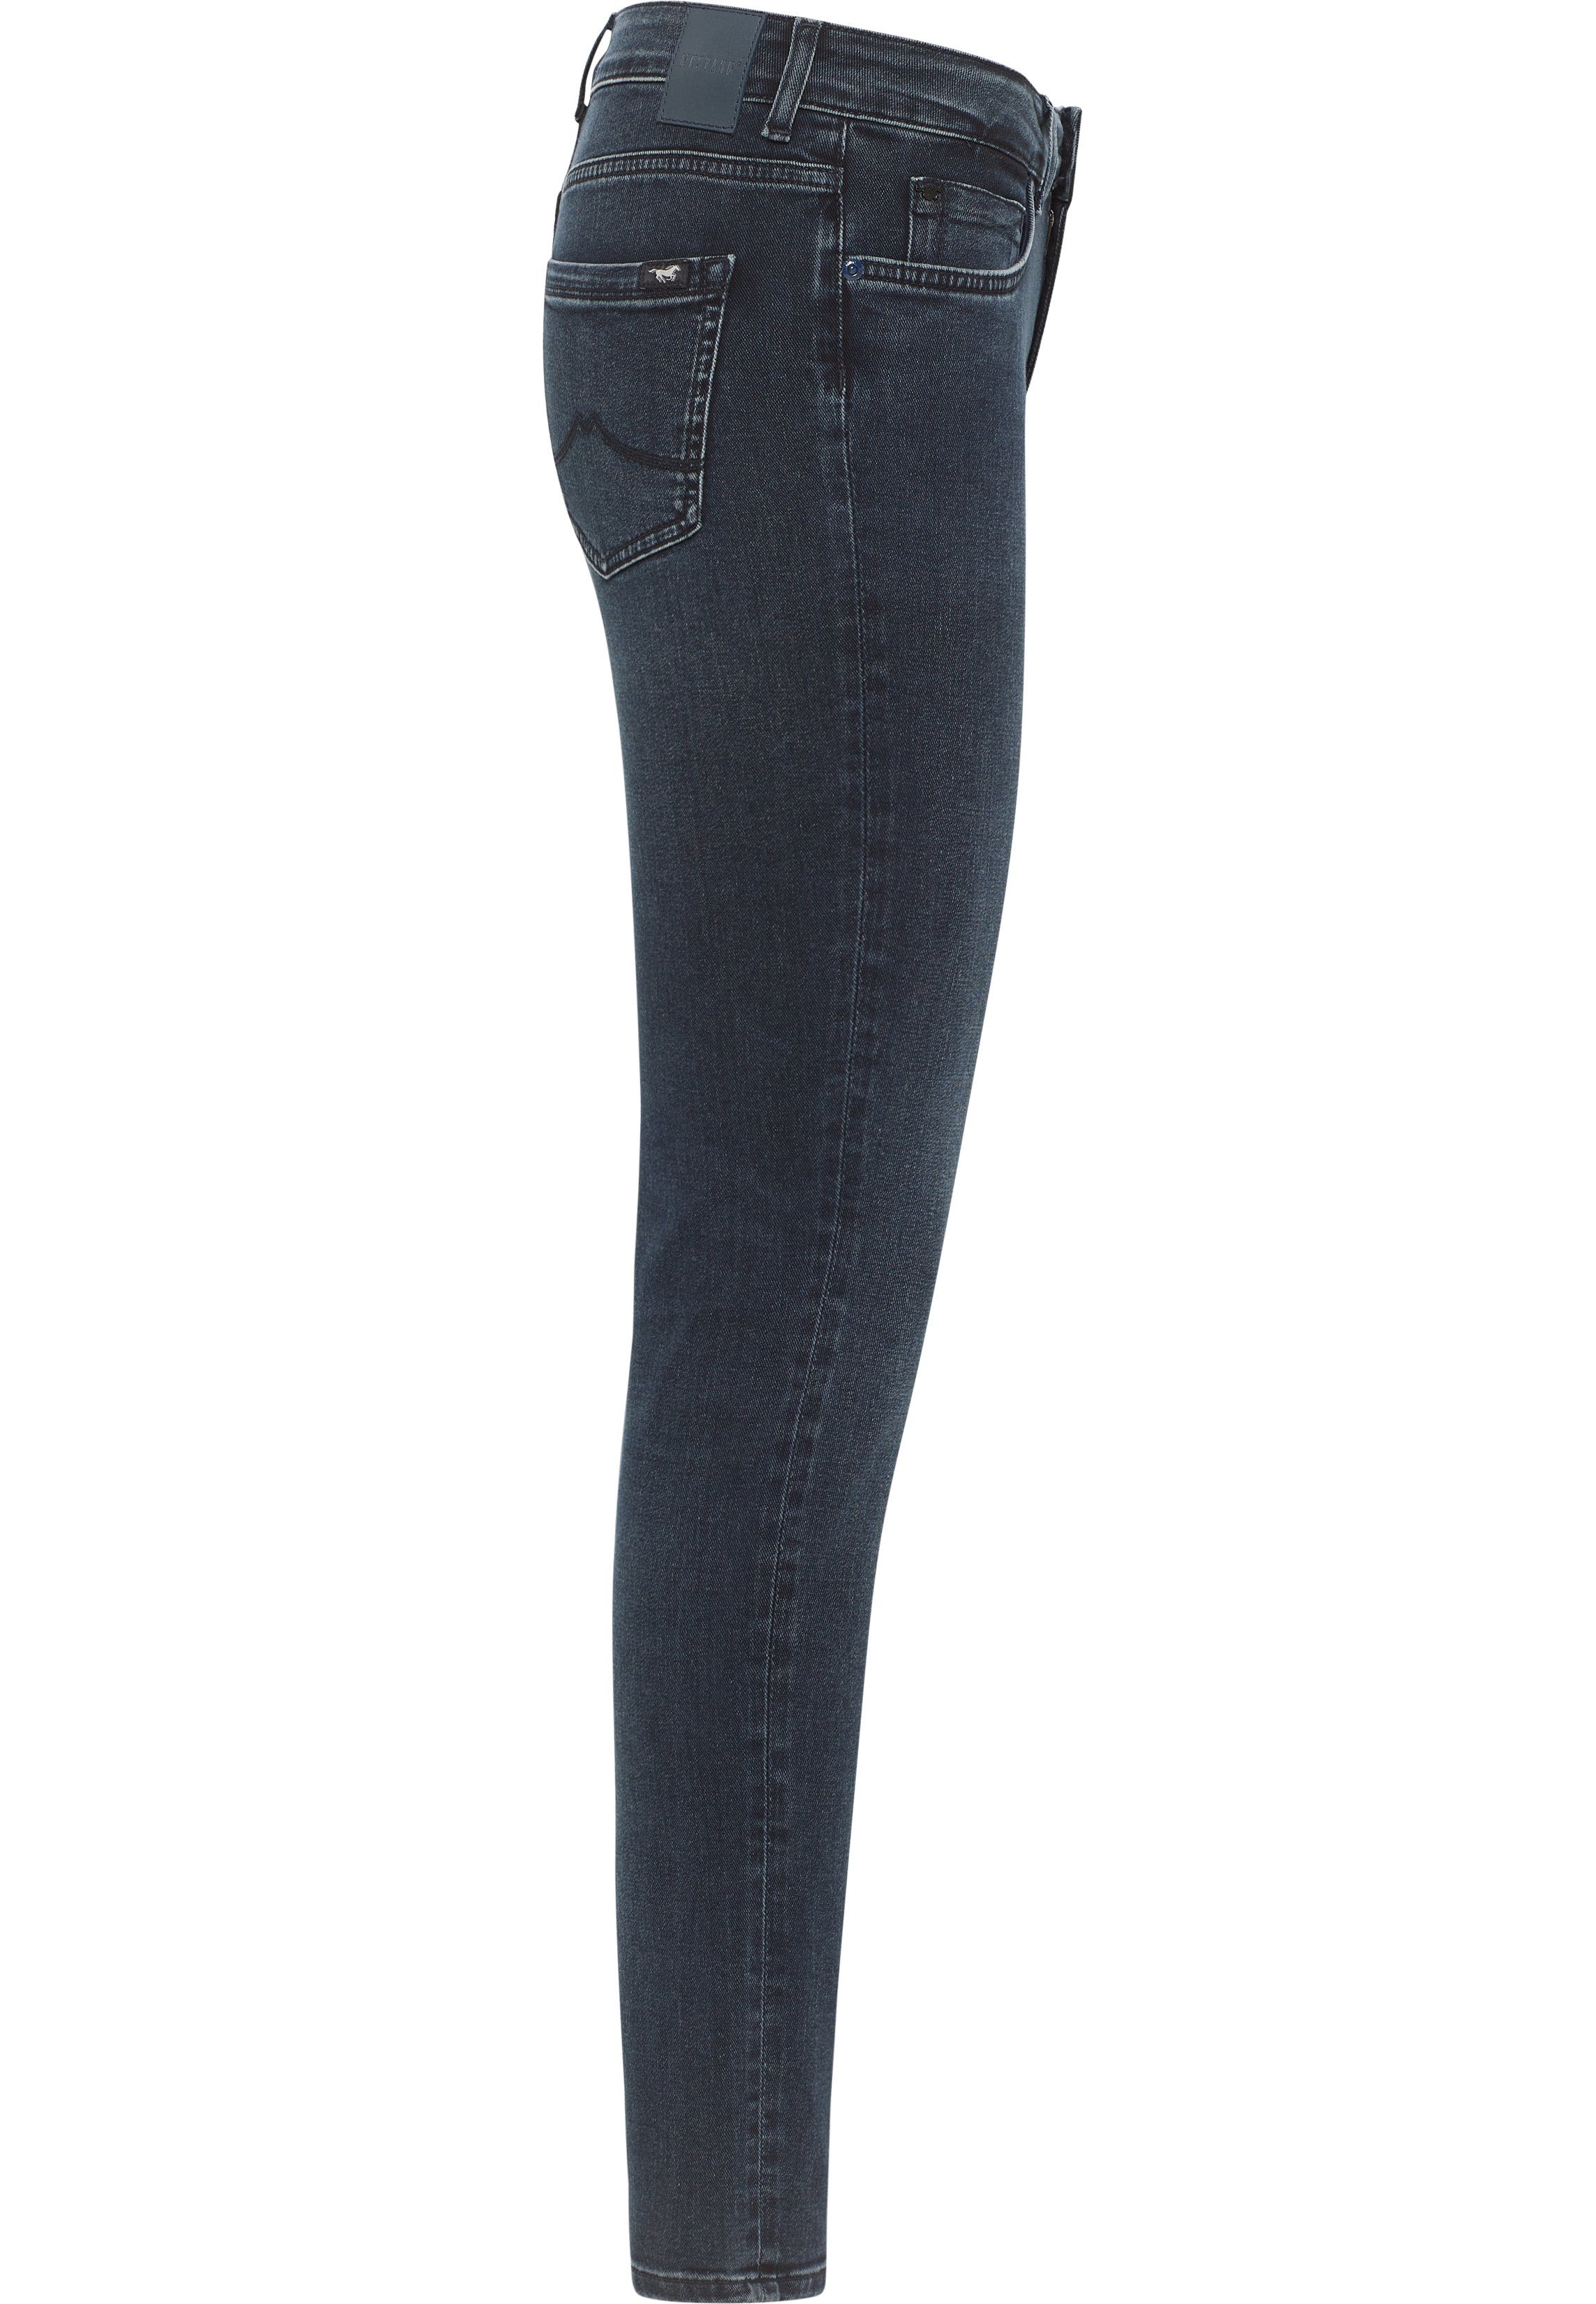 MUSTANG Skinny-fit-Jeans Style Skinny Shelby dunkelblau-5000882